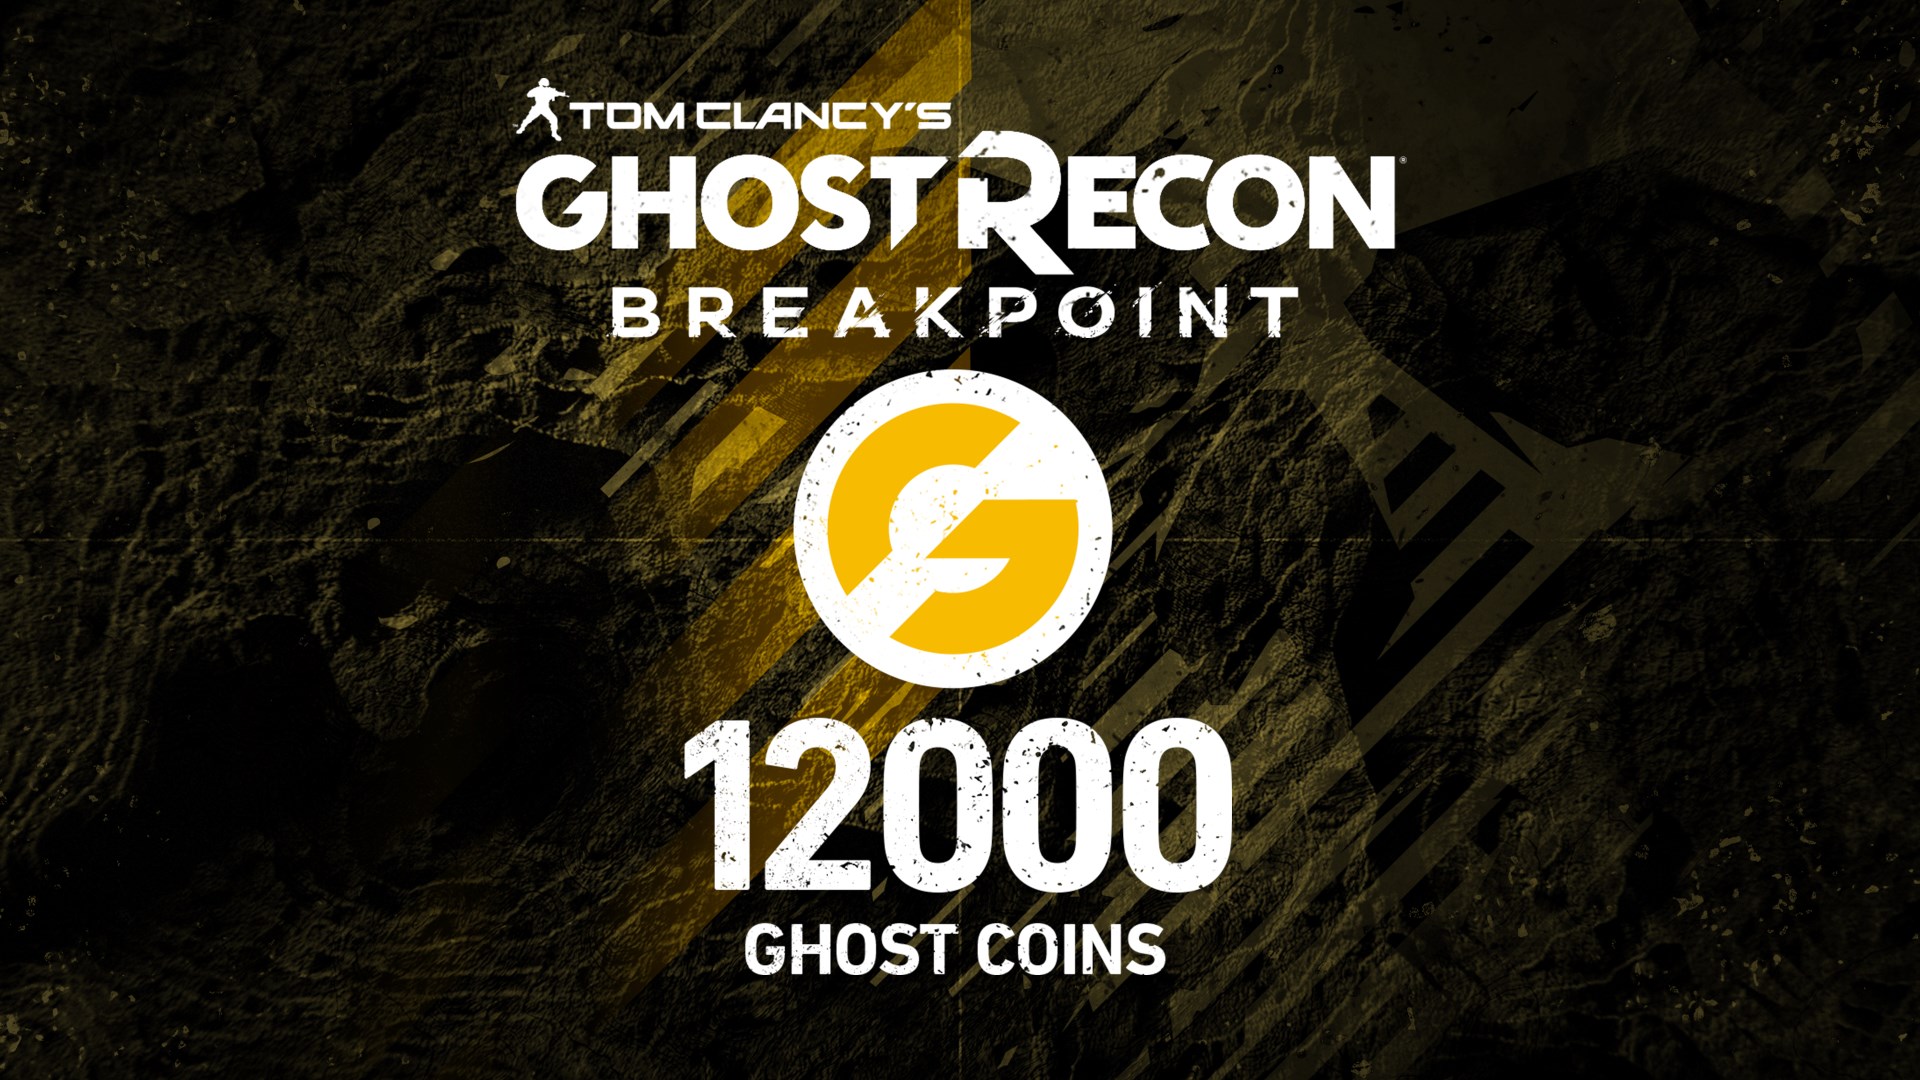 Ghost Recon Breakpoint: 9600 (+2400) Ghost Coins